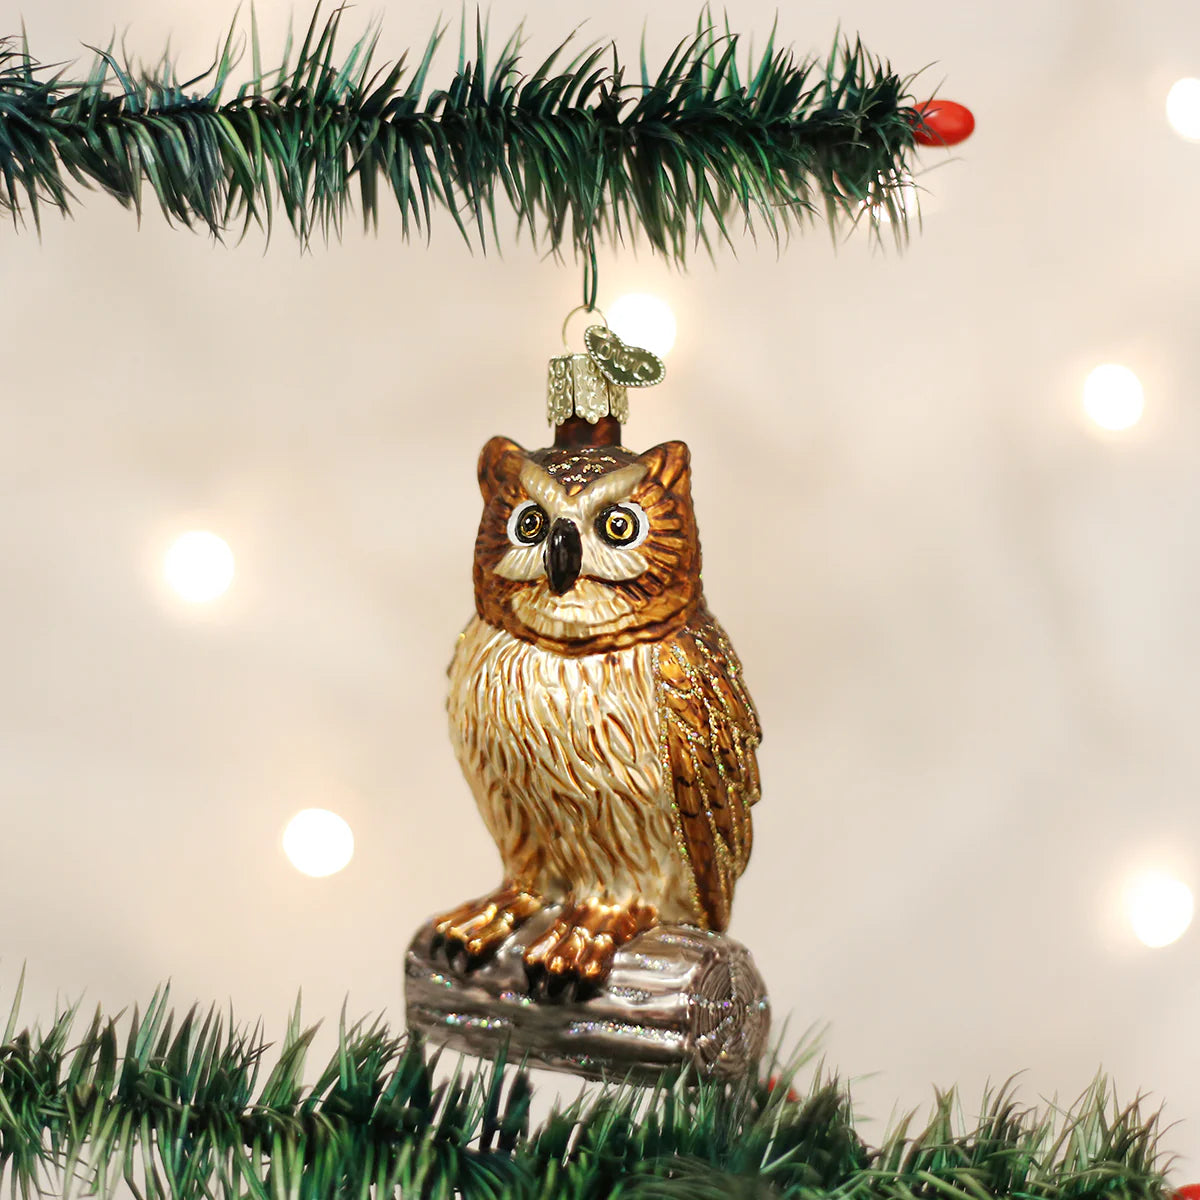 Old World Christmas - Wise Old Owl Ornament